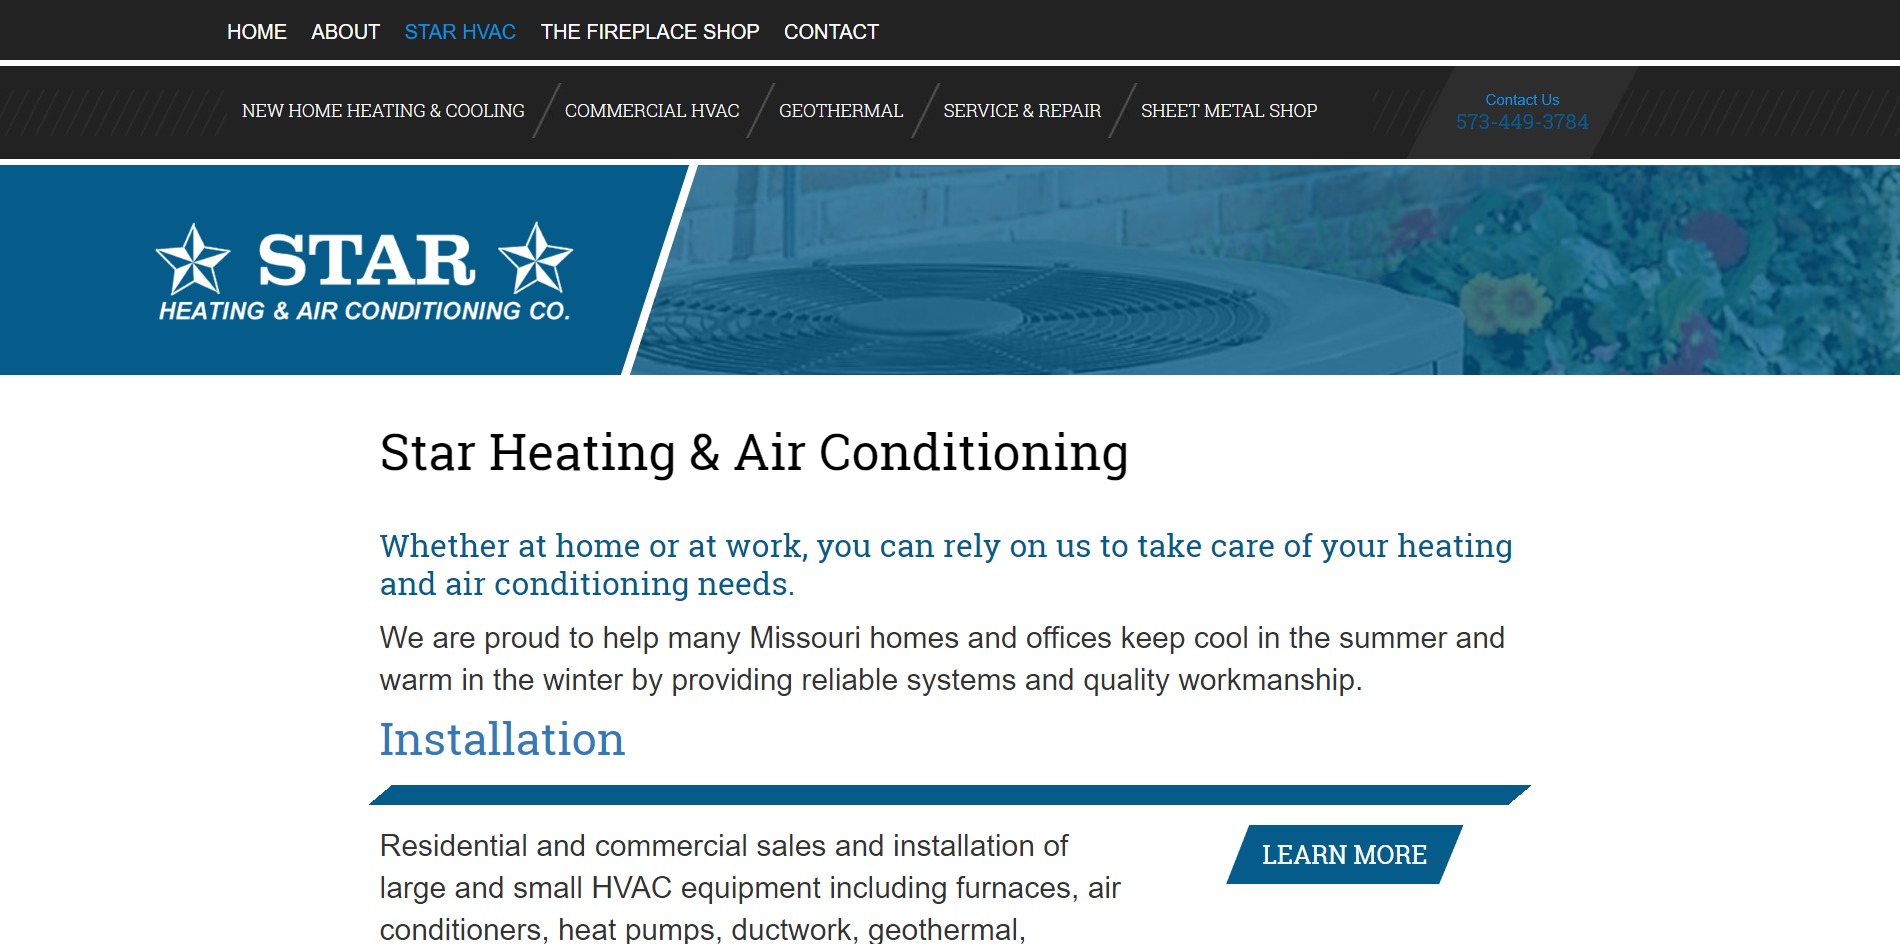 Star Heating and Air Conditioning's New Website: Star Heating Page